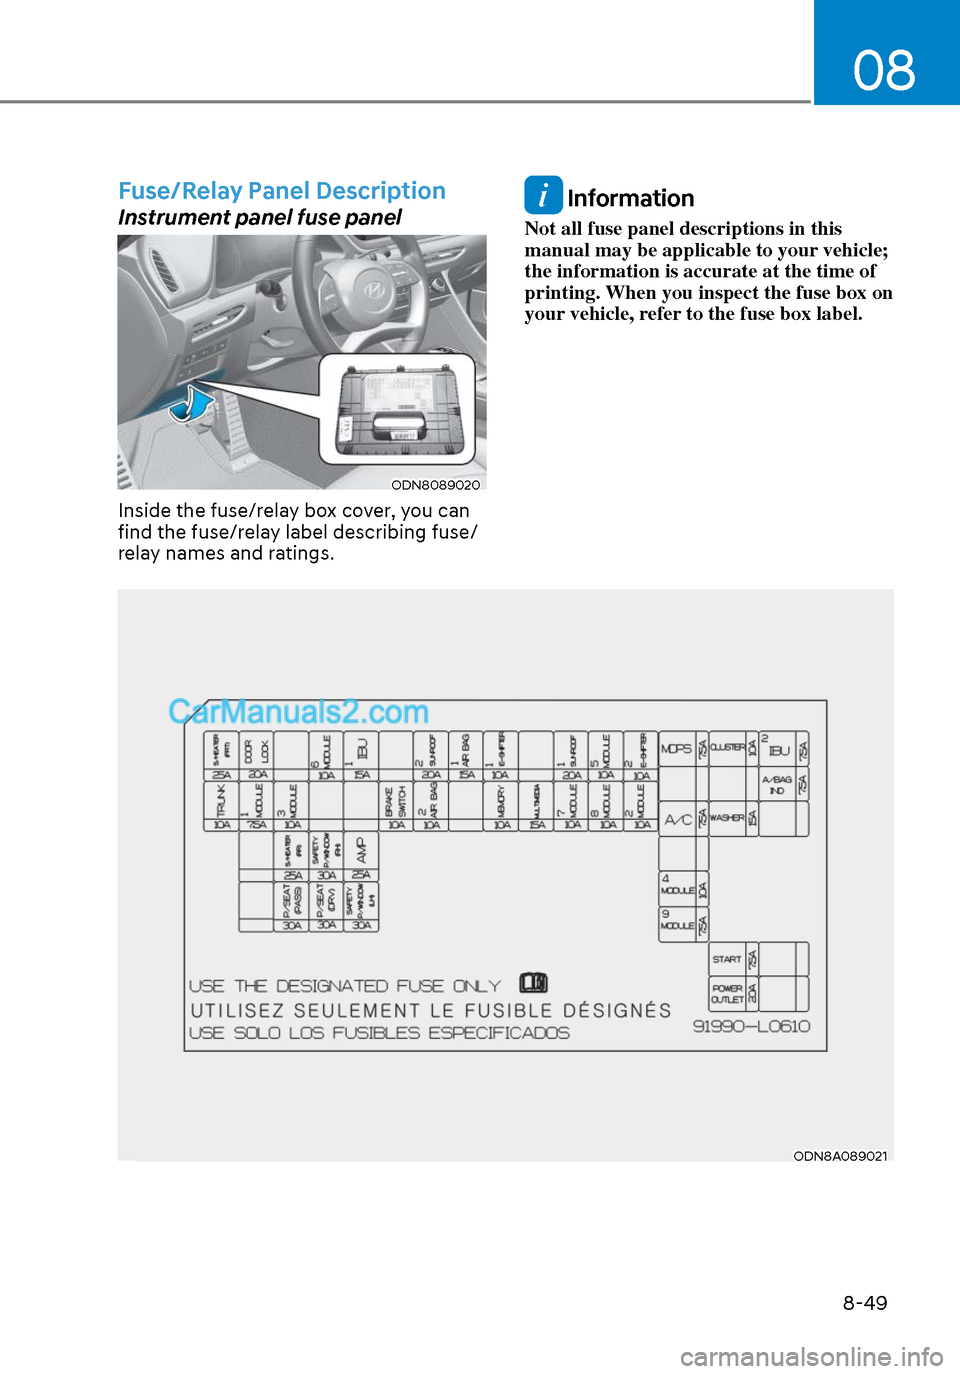 Hyundai Sonata 2020  Owners Manual 08
8-49
Fuse/Relay Panel Description
Instrument panel fuse panel
ODN8089020ODN8089020
Inside the fuse/relay box cover, you can 
find the fuse/relay label describing fuse/
relay names and ratings.
 Inf